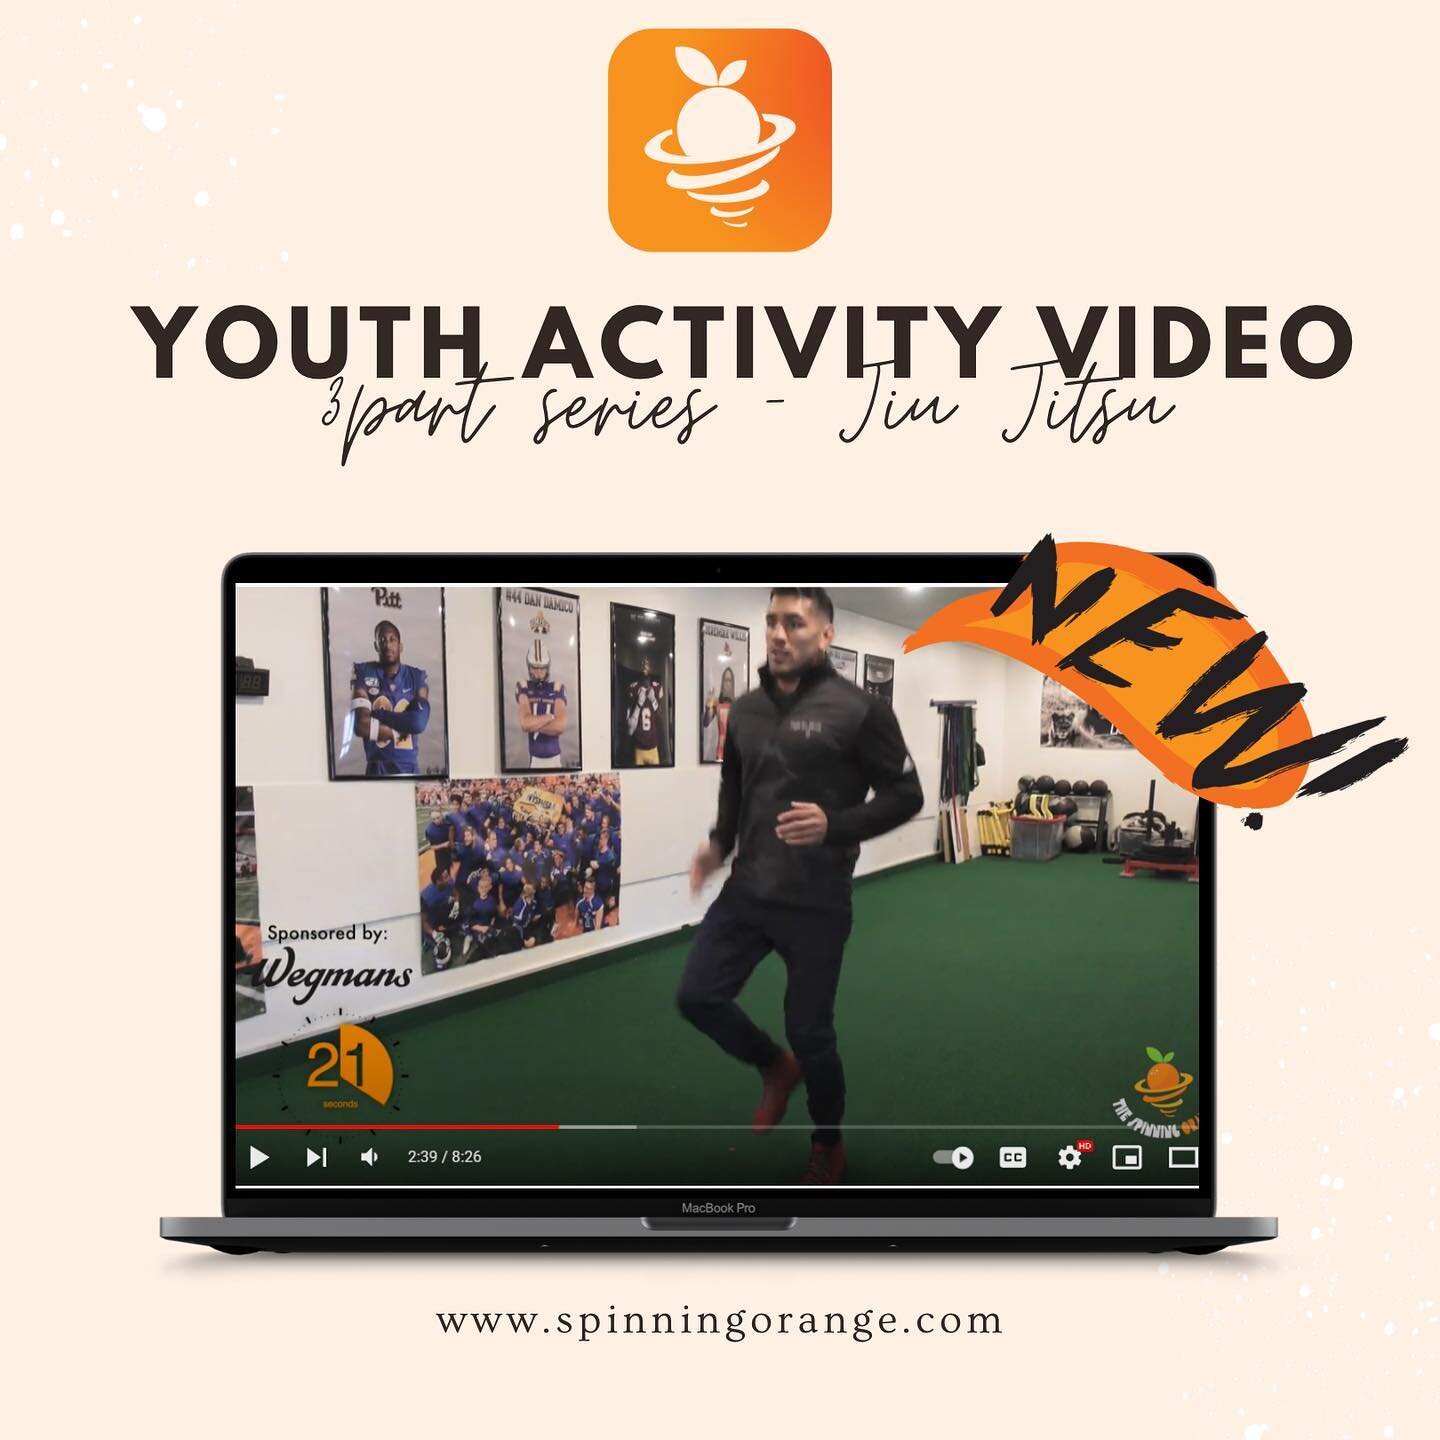 Our 3 part Jiu Jitsu youth series is live! Each workout is only 7min in length and can be completed without any equipment! 
We thank @wegmans for sponsoring our videos! 
#homeschool #fitkids #healthykids